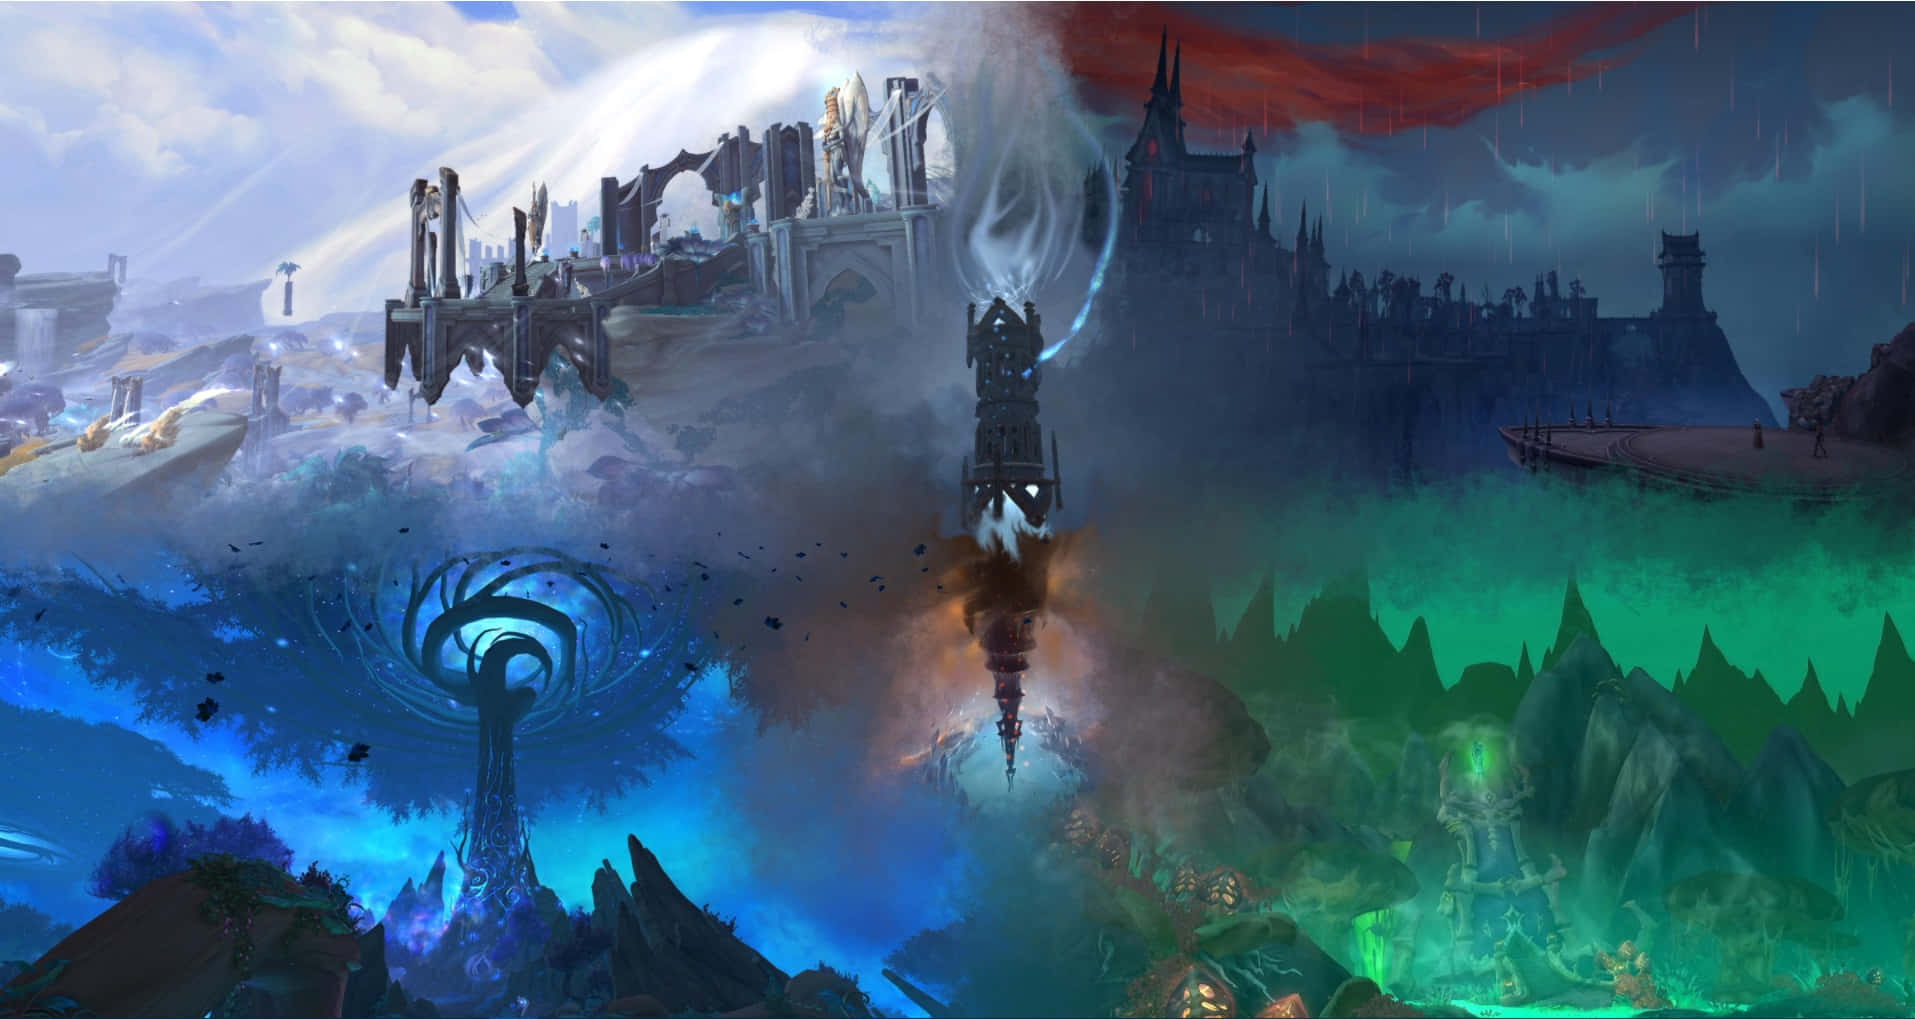 Epic Adventure Awaits in World of Warcraft